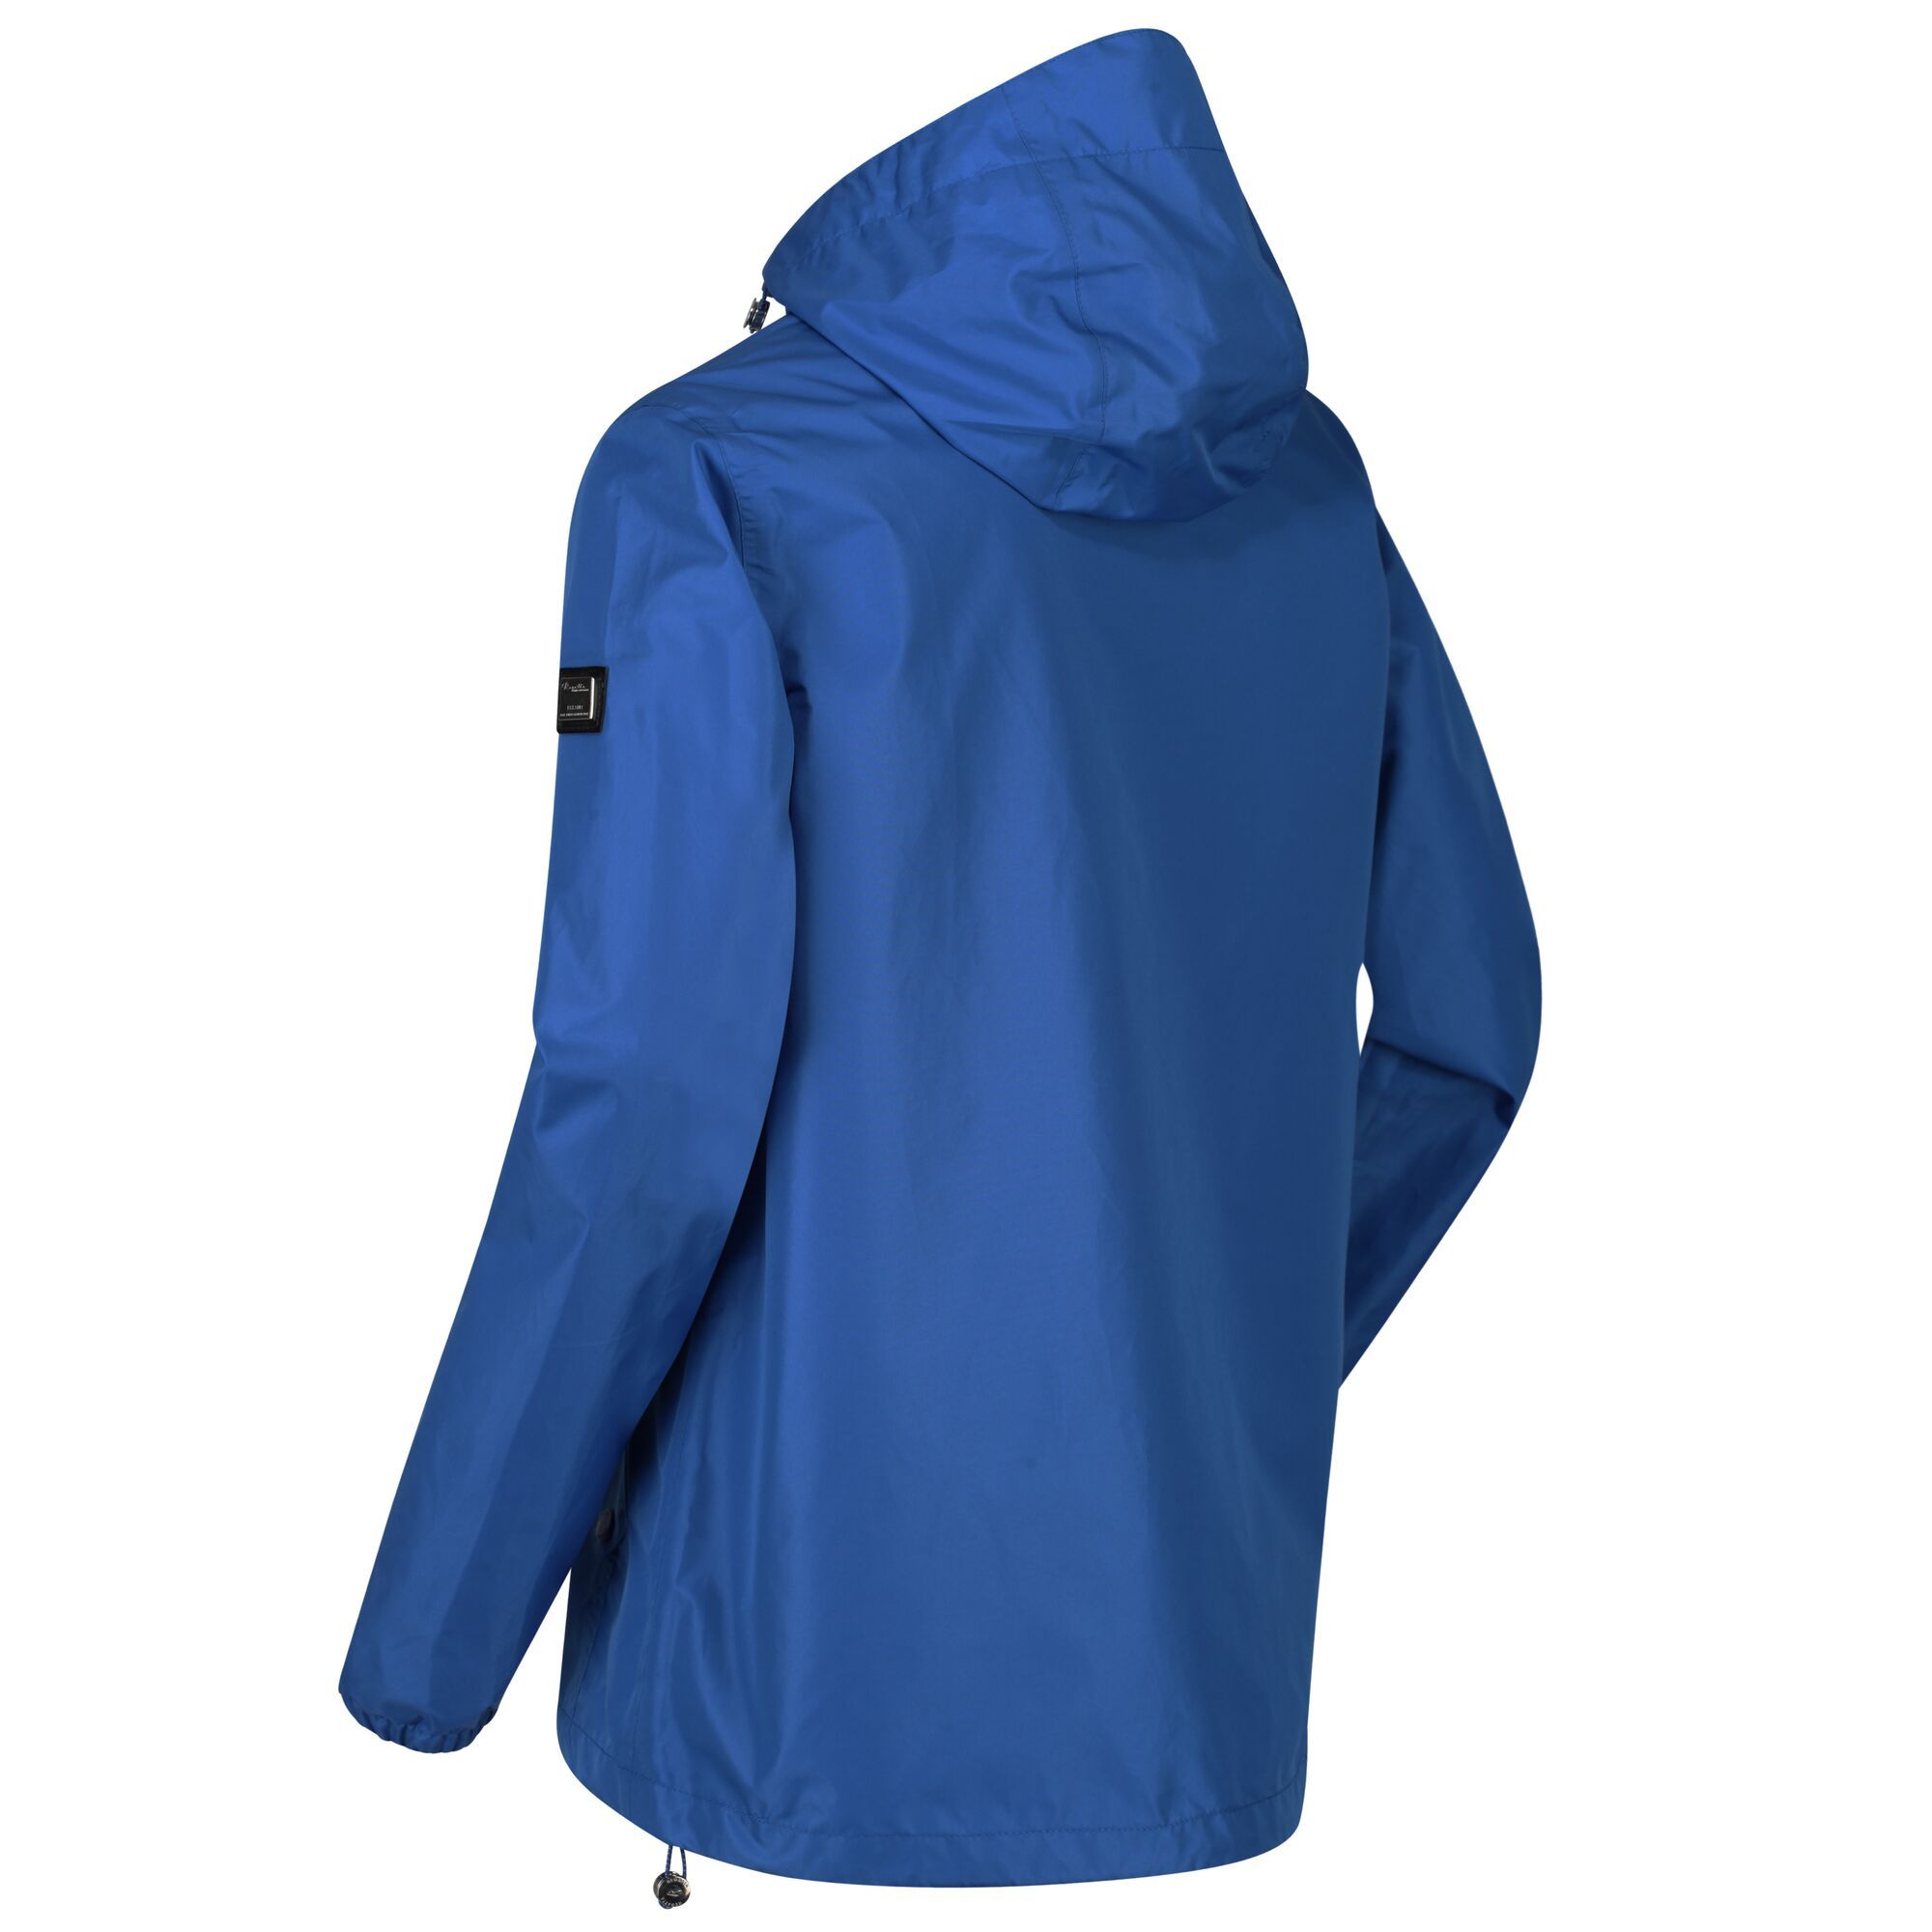 Material: 100% polyester. Durable water repellent finish. Taped seams. Polyester taffeta lining. Grown on hood with adjusters. Elasticated cuffs. 2 lower pockets with flaps and branded snap fastening. Adjustable shockcord hem.